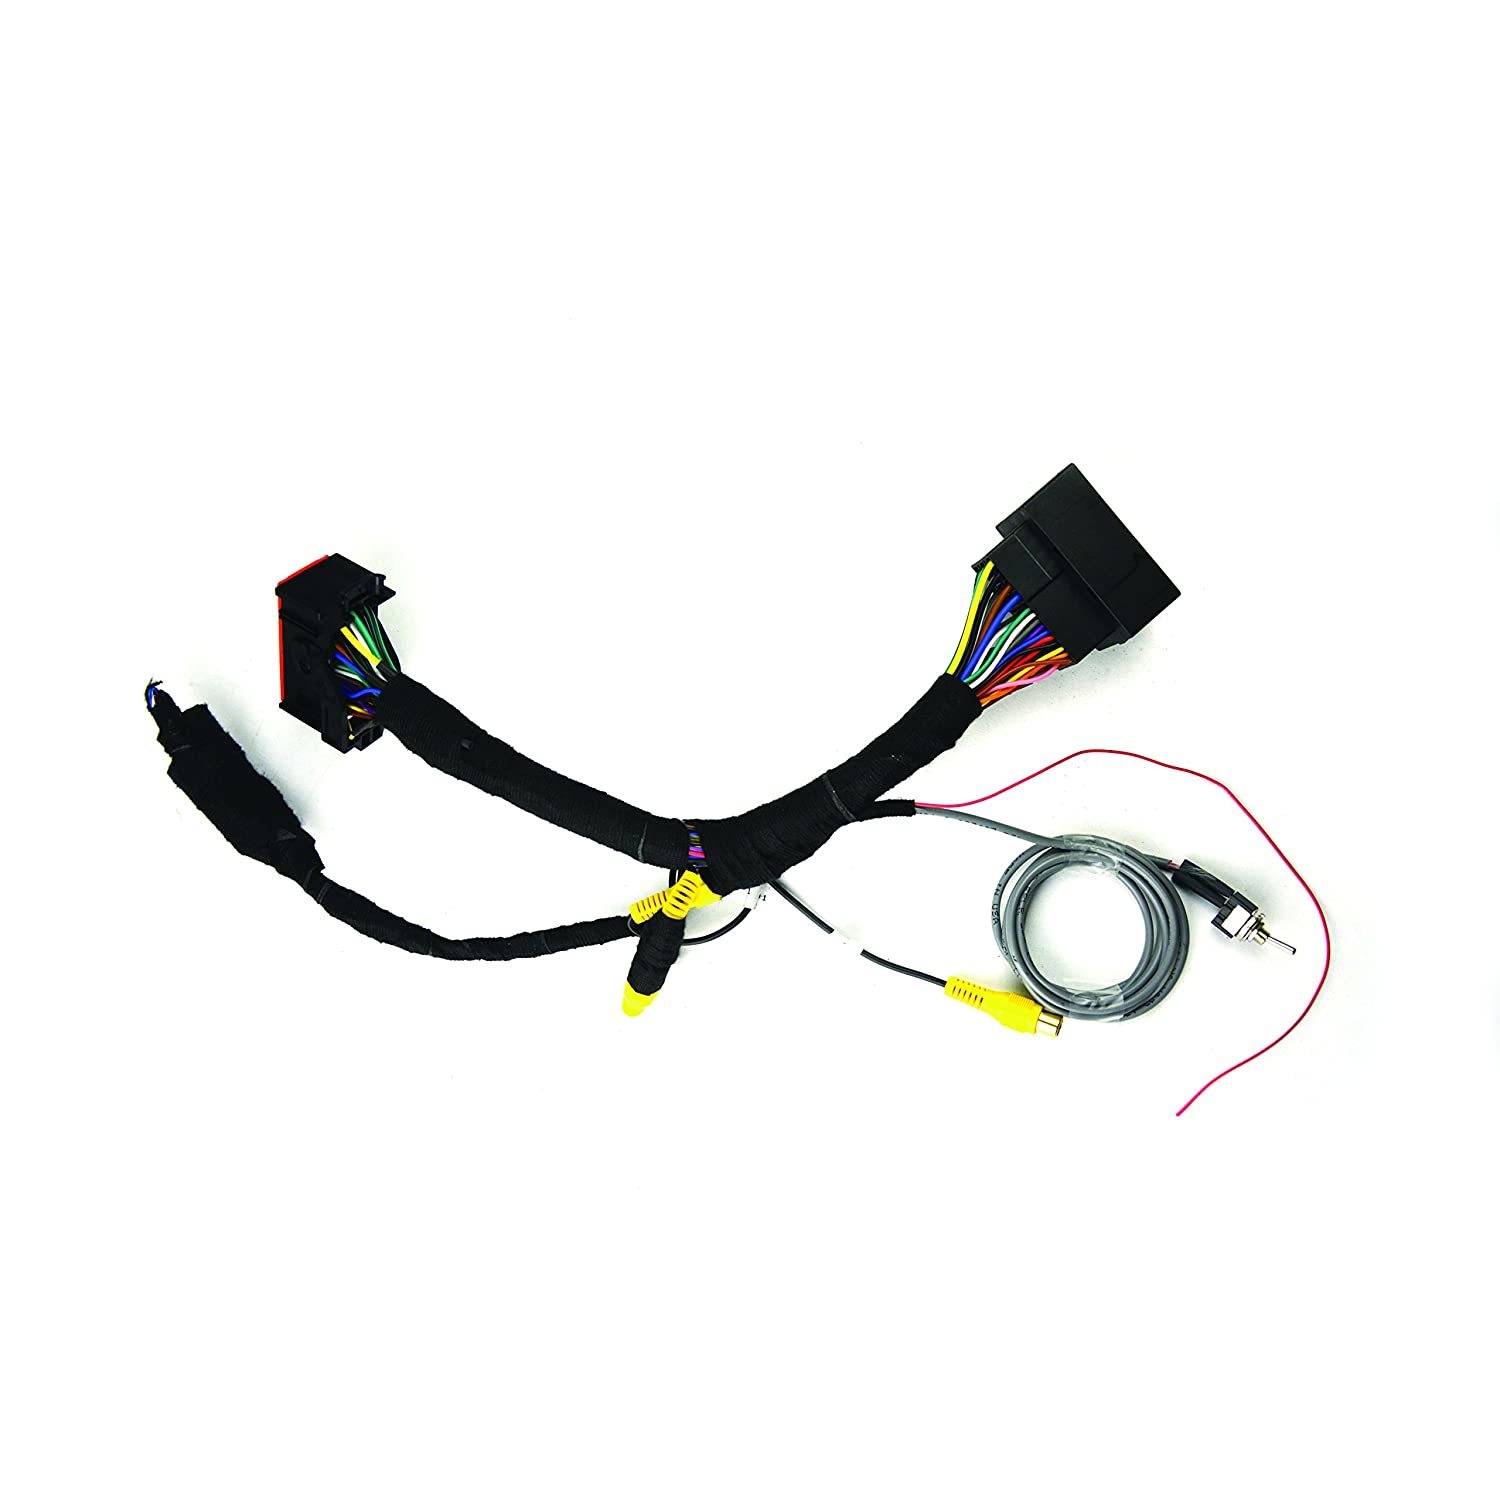 Fltw-7627 Cargo Camera Plug And Play Harness For S With 5 Or 8.4 Ory